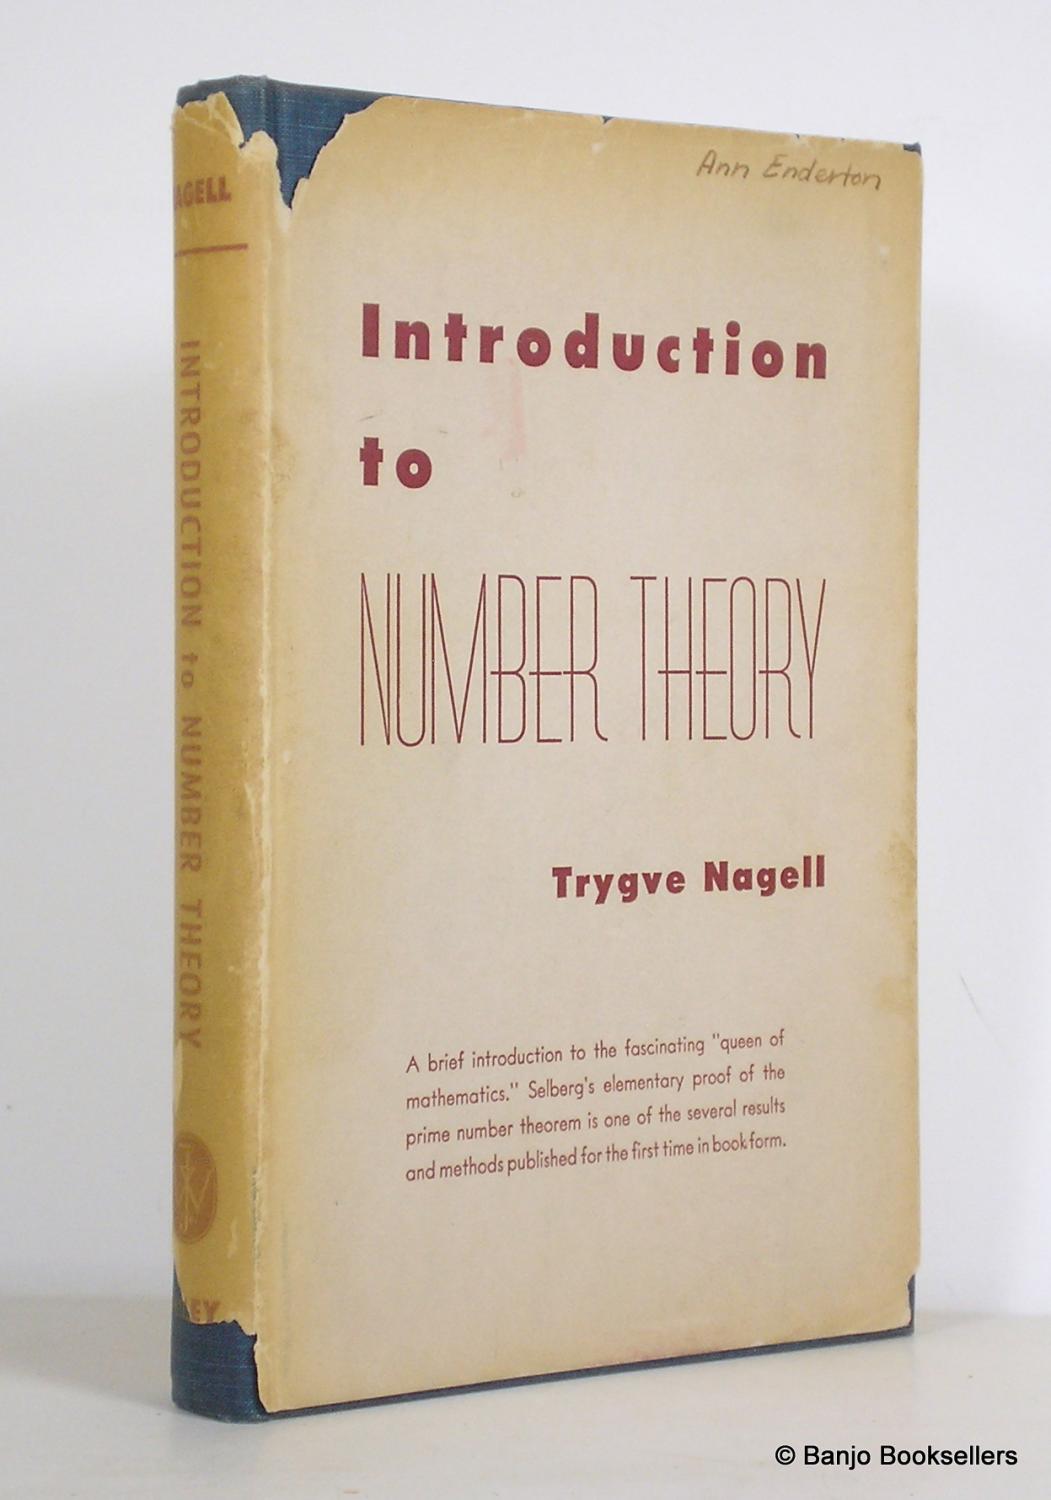 Introduction to number theory